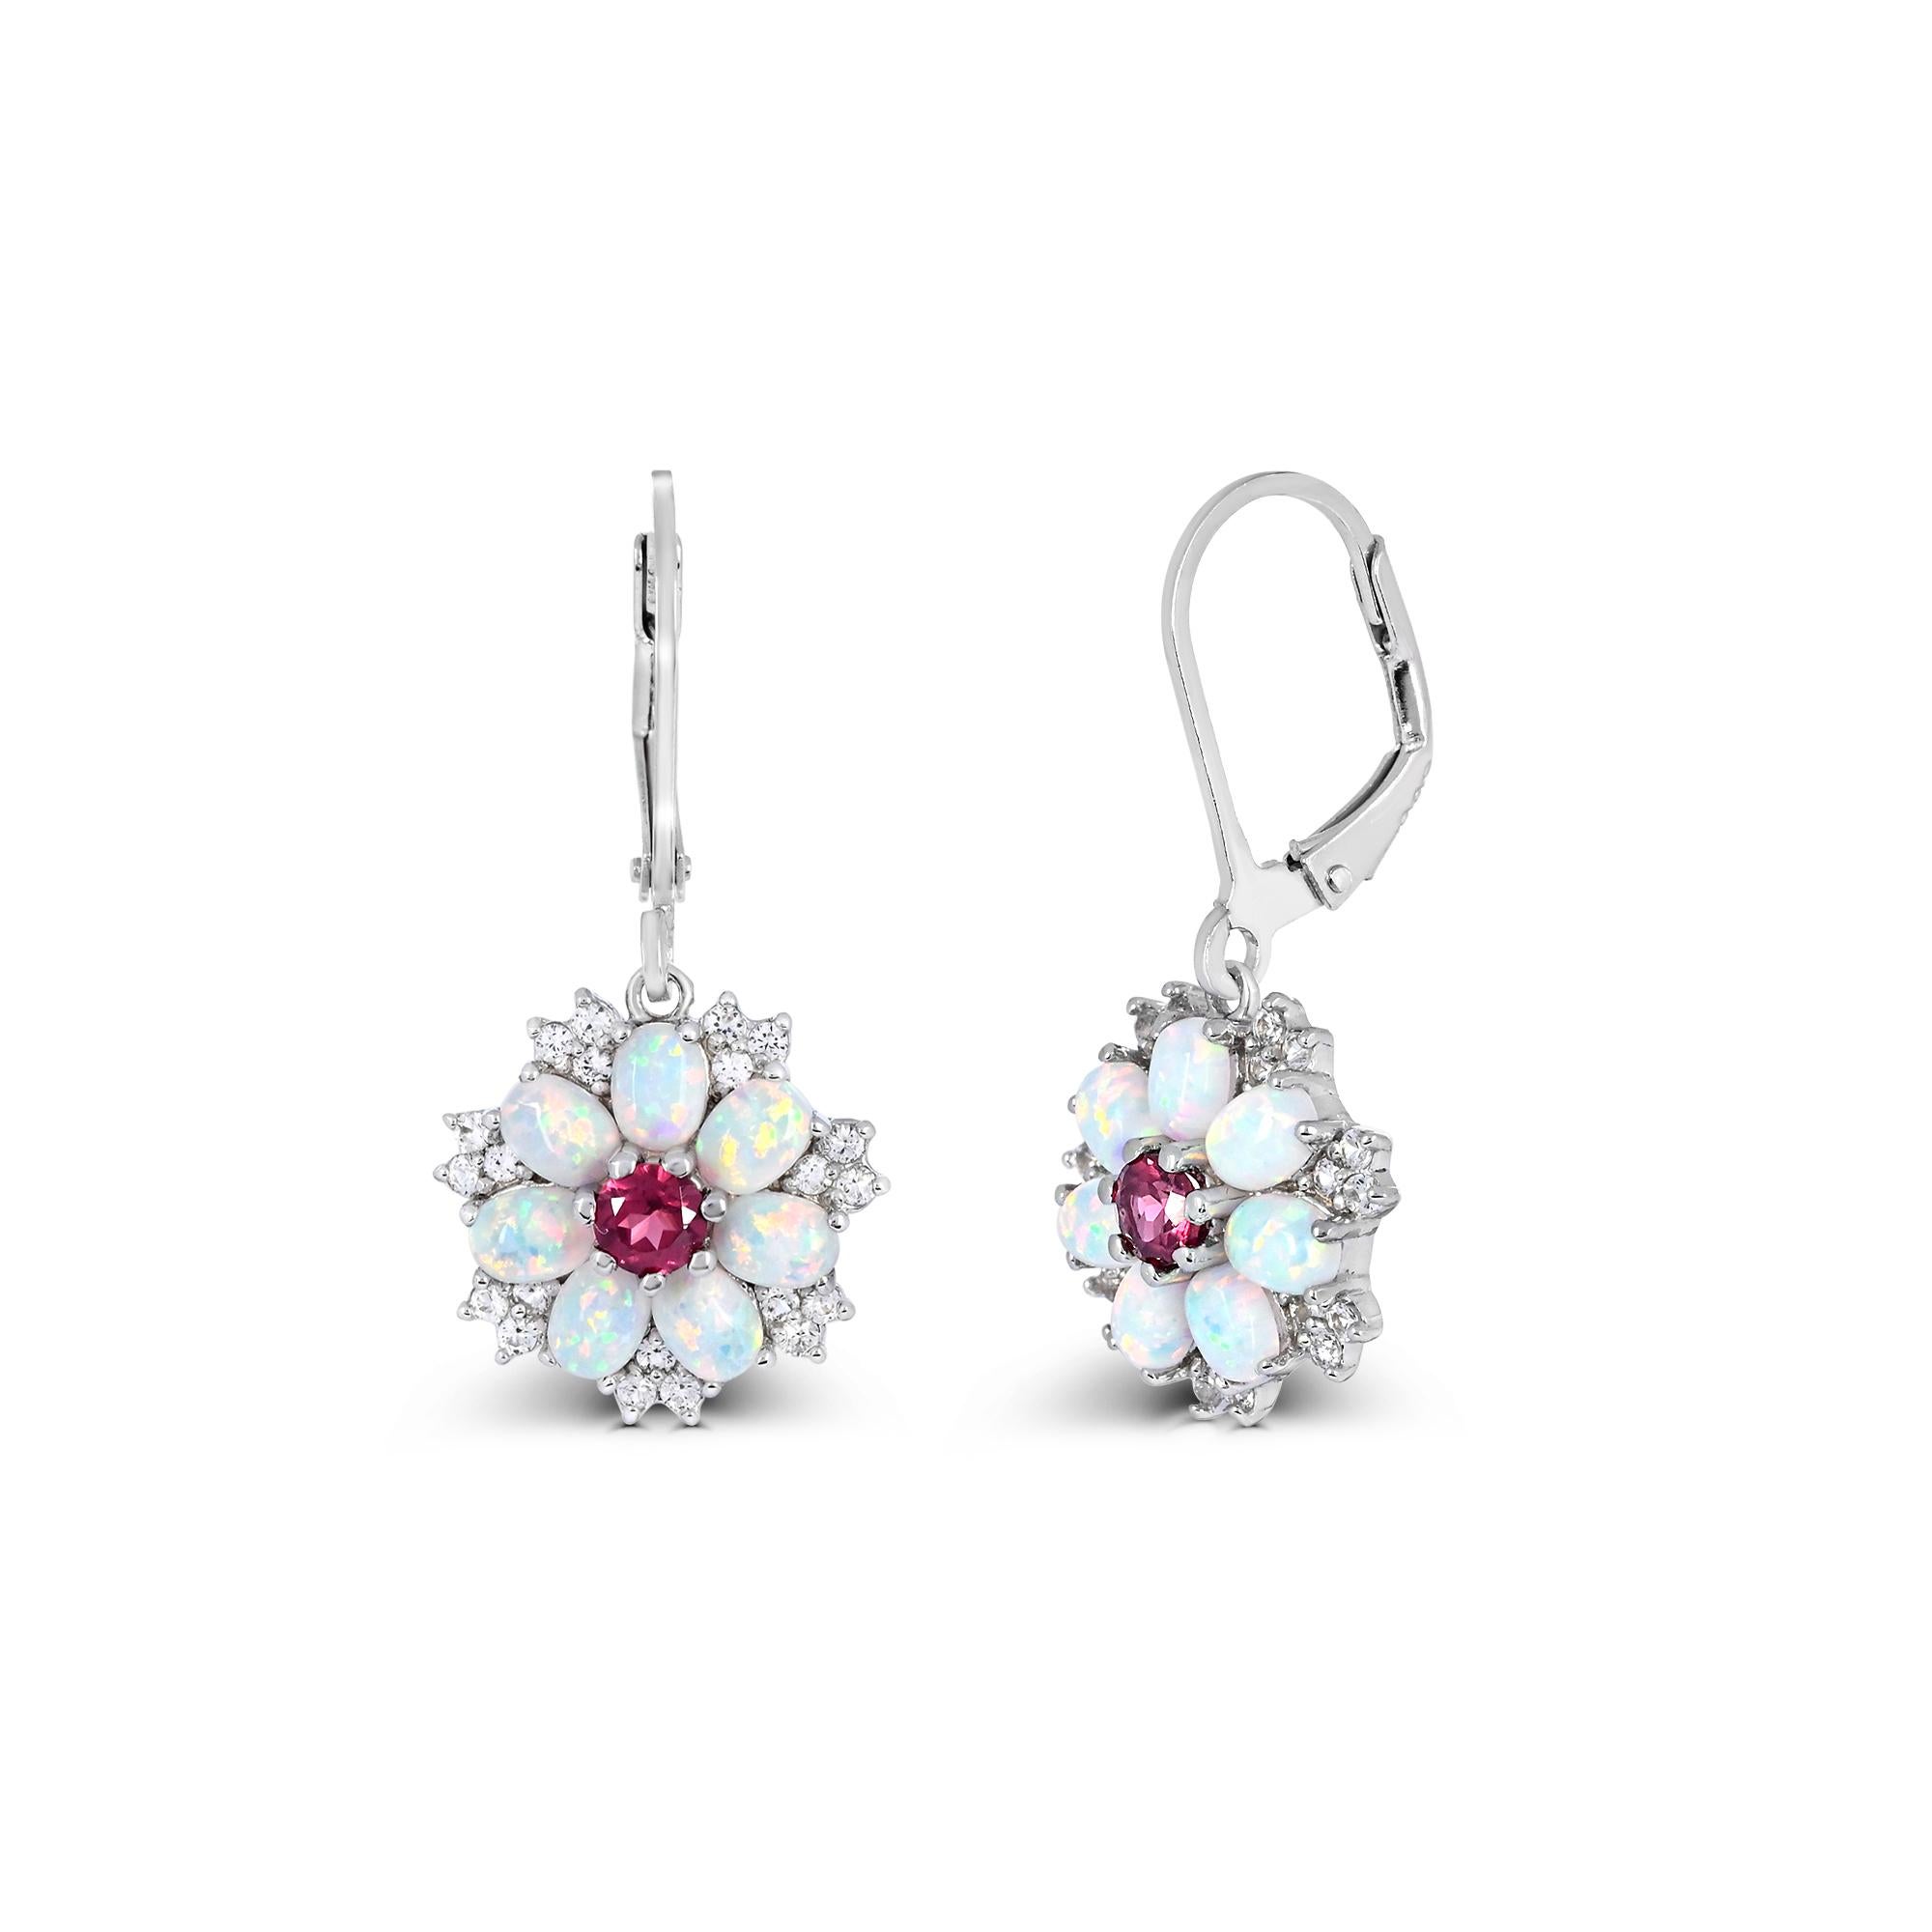 Indulge in the charm of our floral earrings in sterling silver. Crafted with meticulous attention to detail, these earrings boast a stunning combination of rhodolite garnet accented by oval created opal. The sparkling round created white sapphire